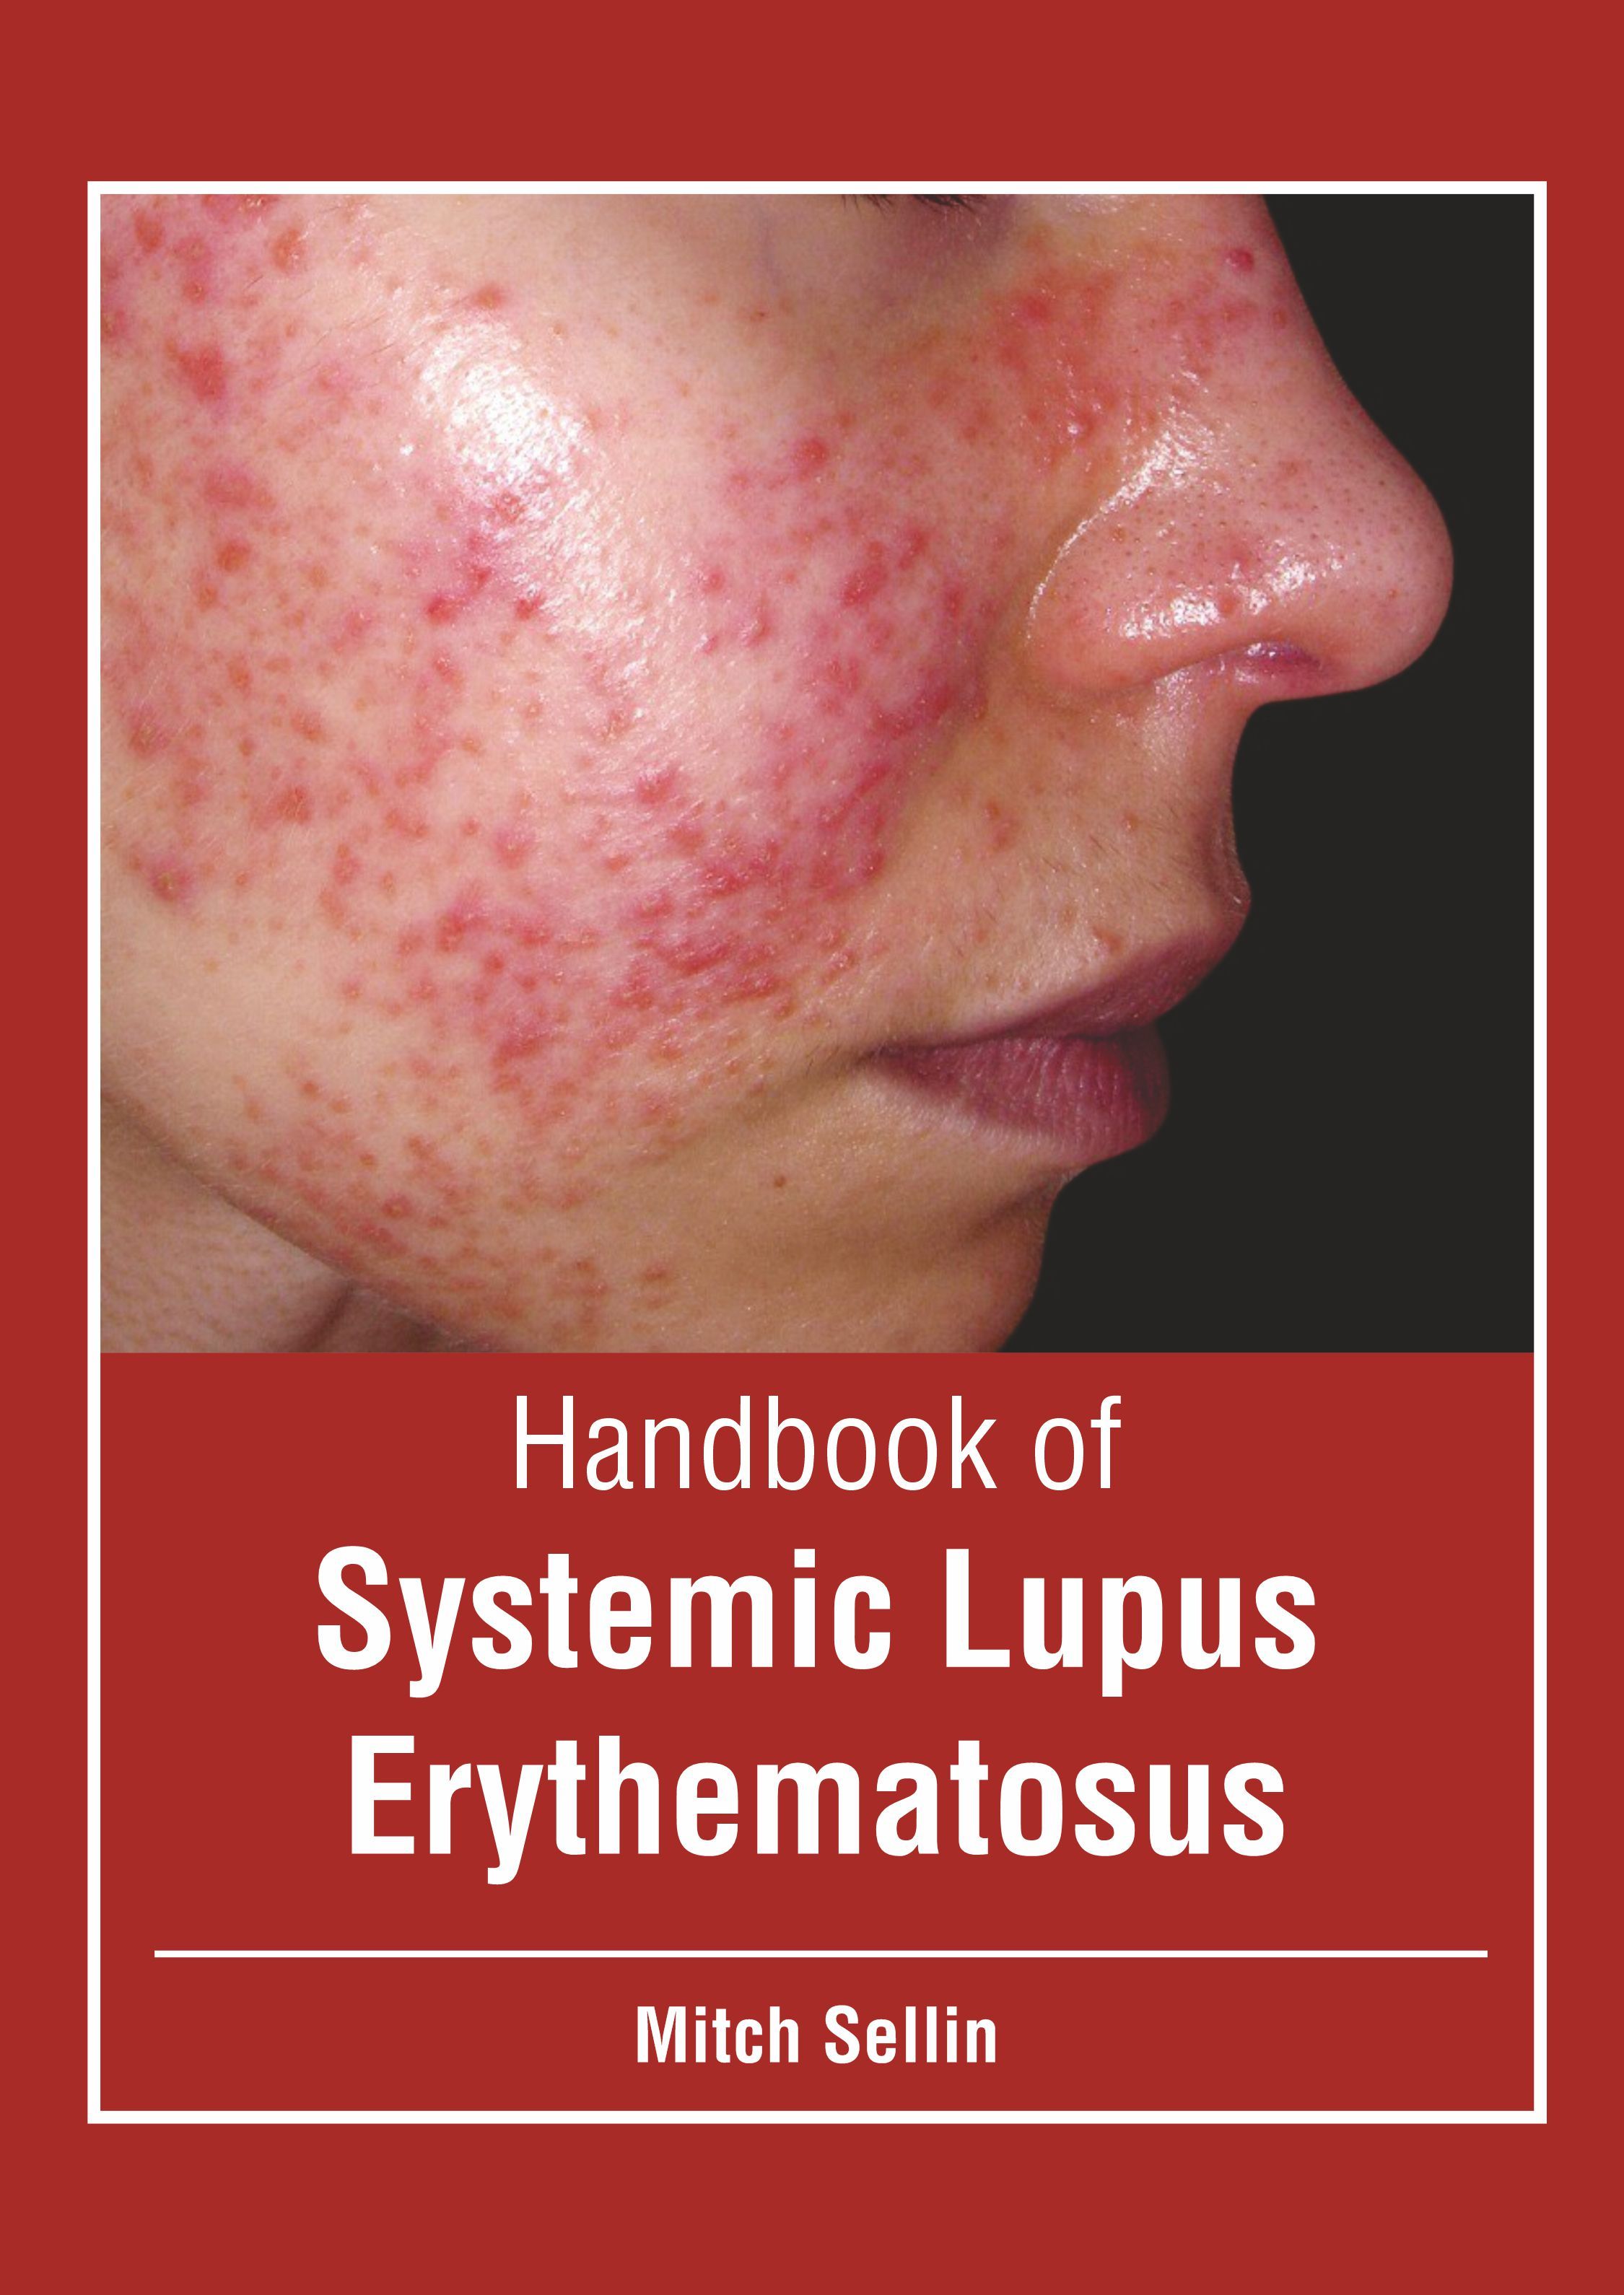 

exclusive-publishers/american-medical-publishers/handbook-of-systemic-lupus-erythematosus-9781639272112